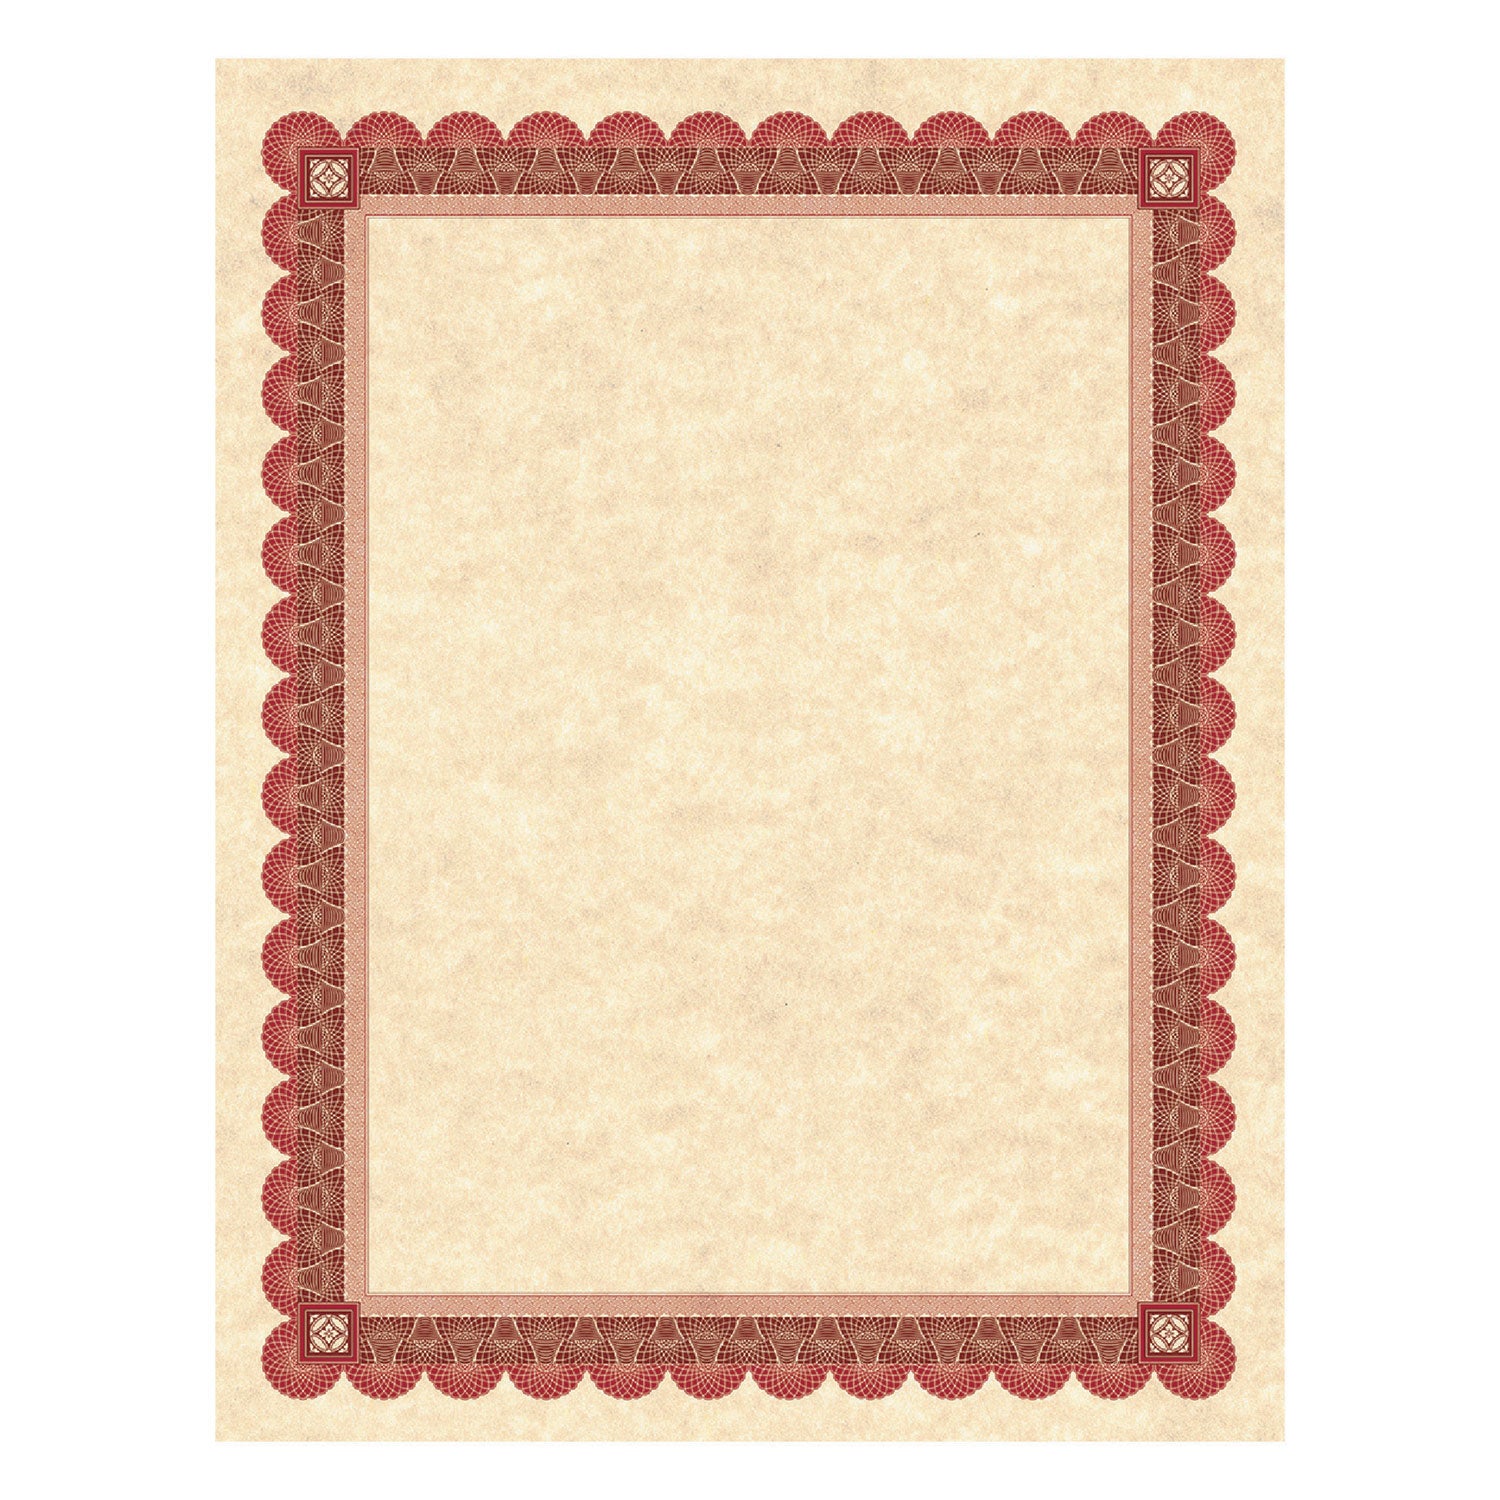 Parchment Certificates, Academic, 8.5 x 11, Copper with Red/Brown Border, 25/Pack - 